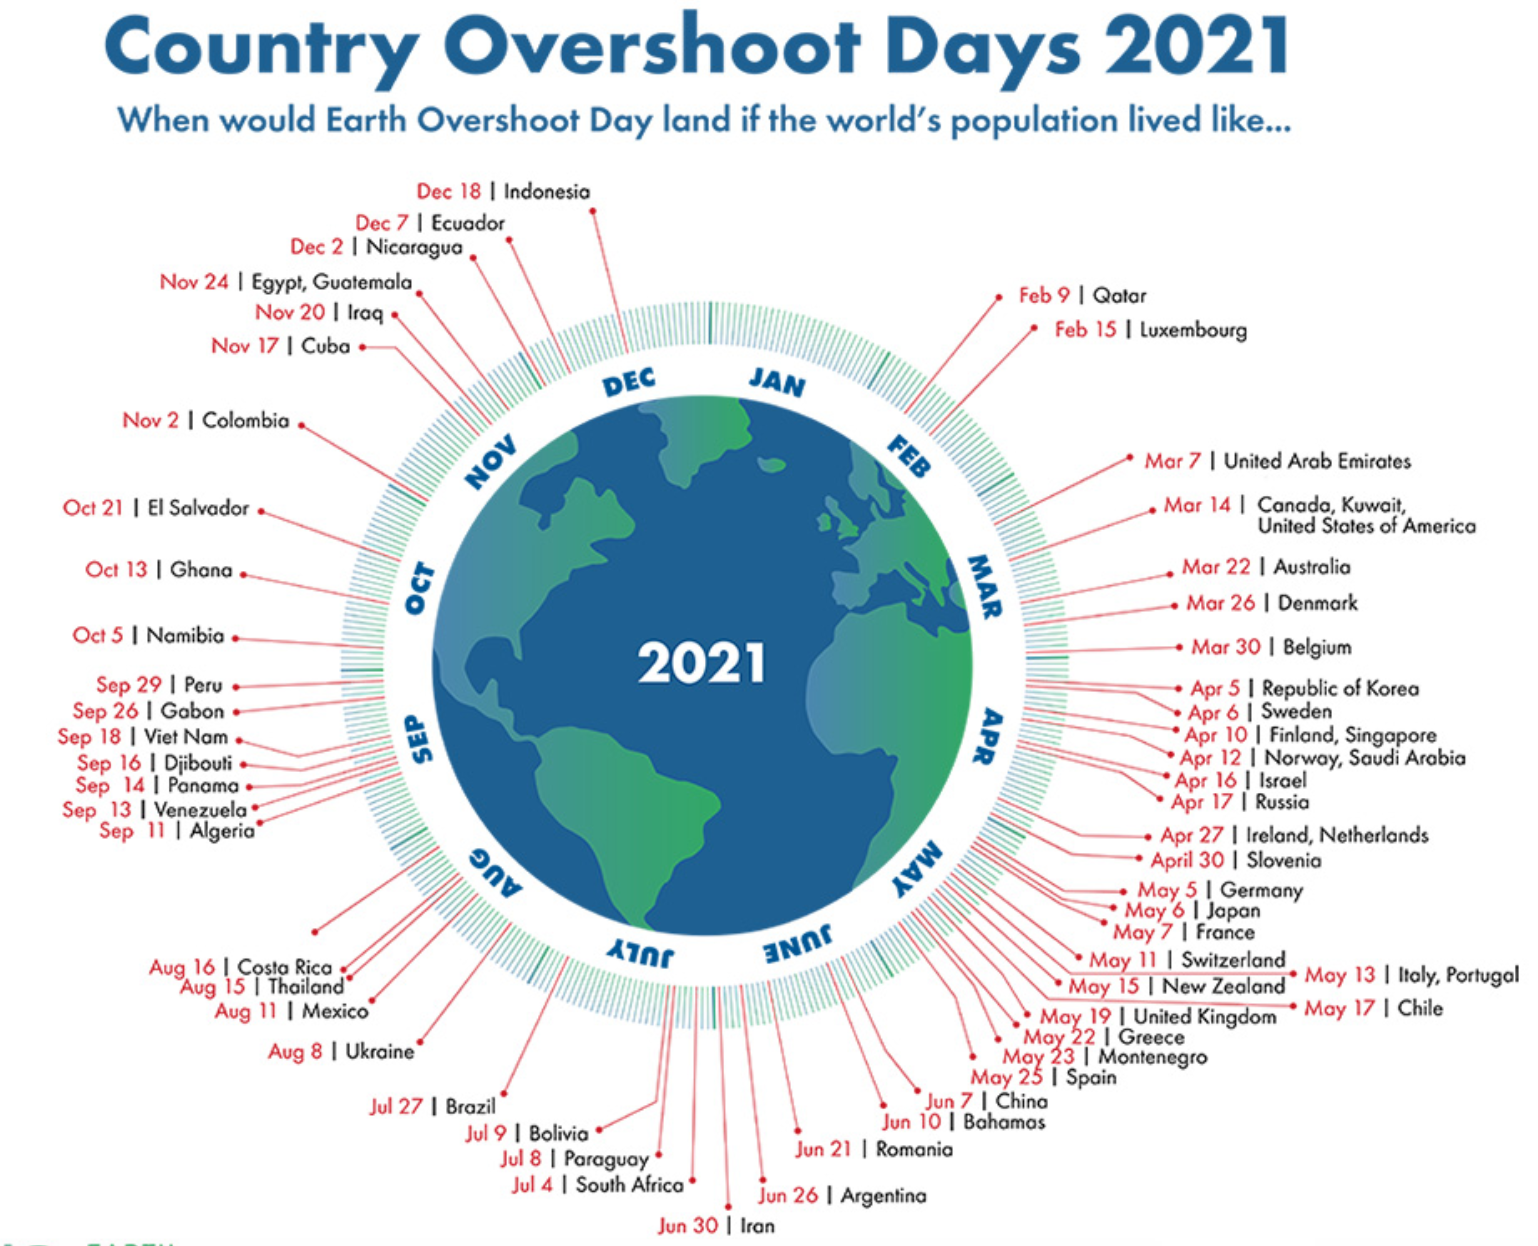 information on 2021 Overshoot day